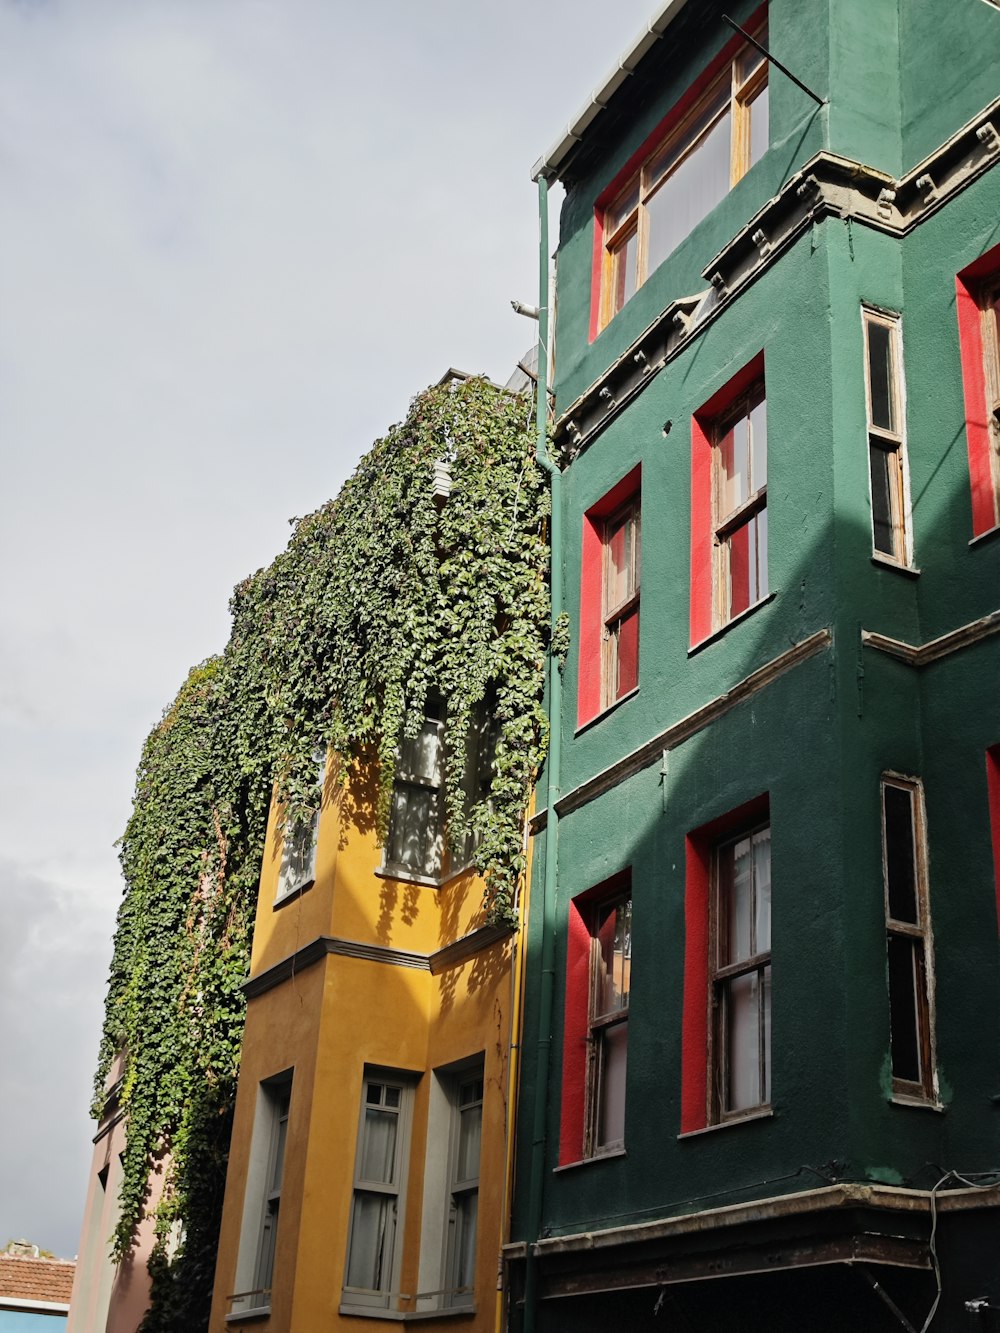 a green building with red shutters next to a yellow building